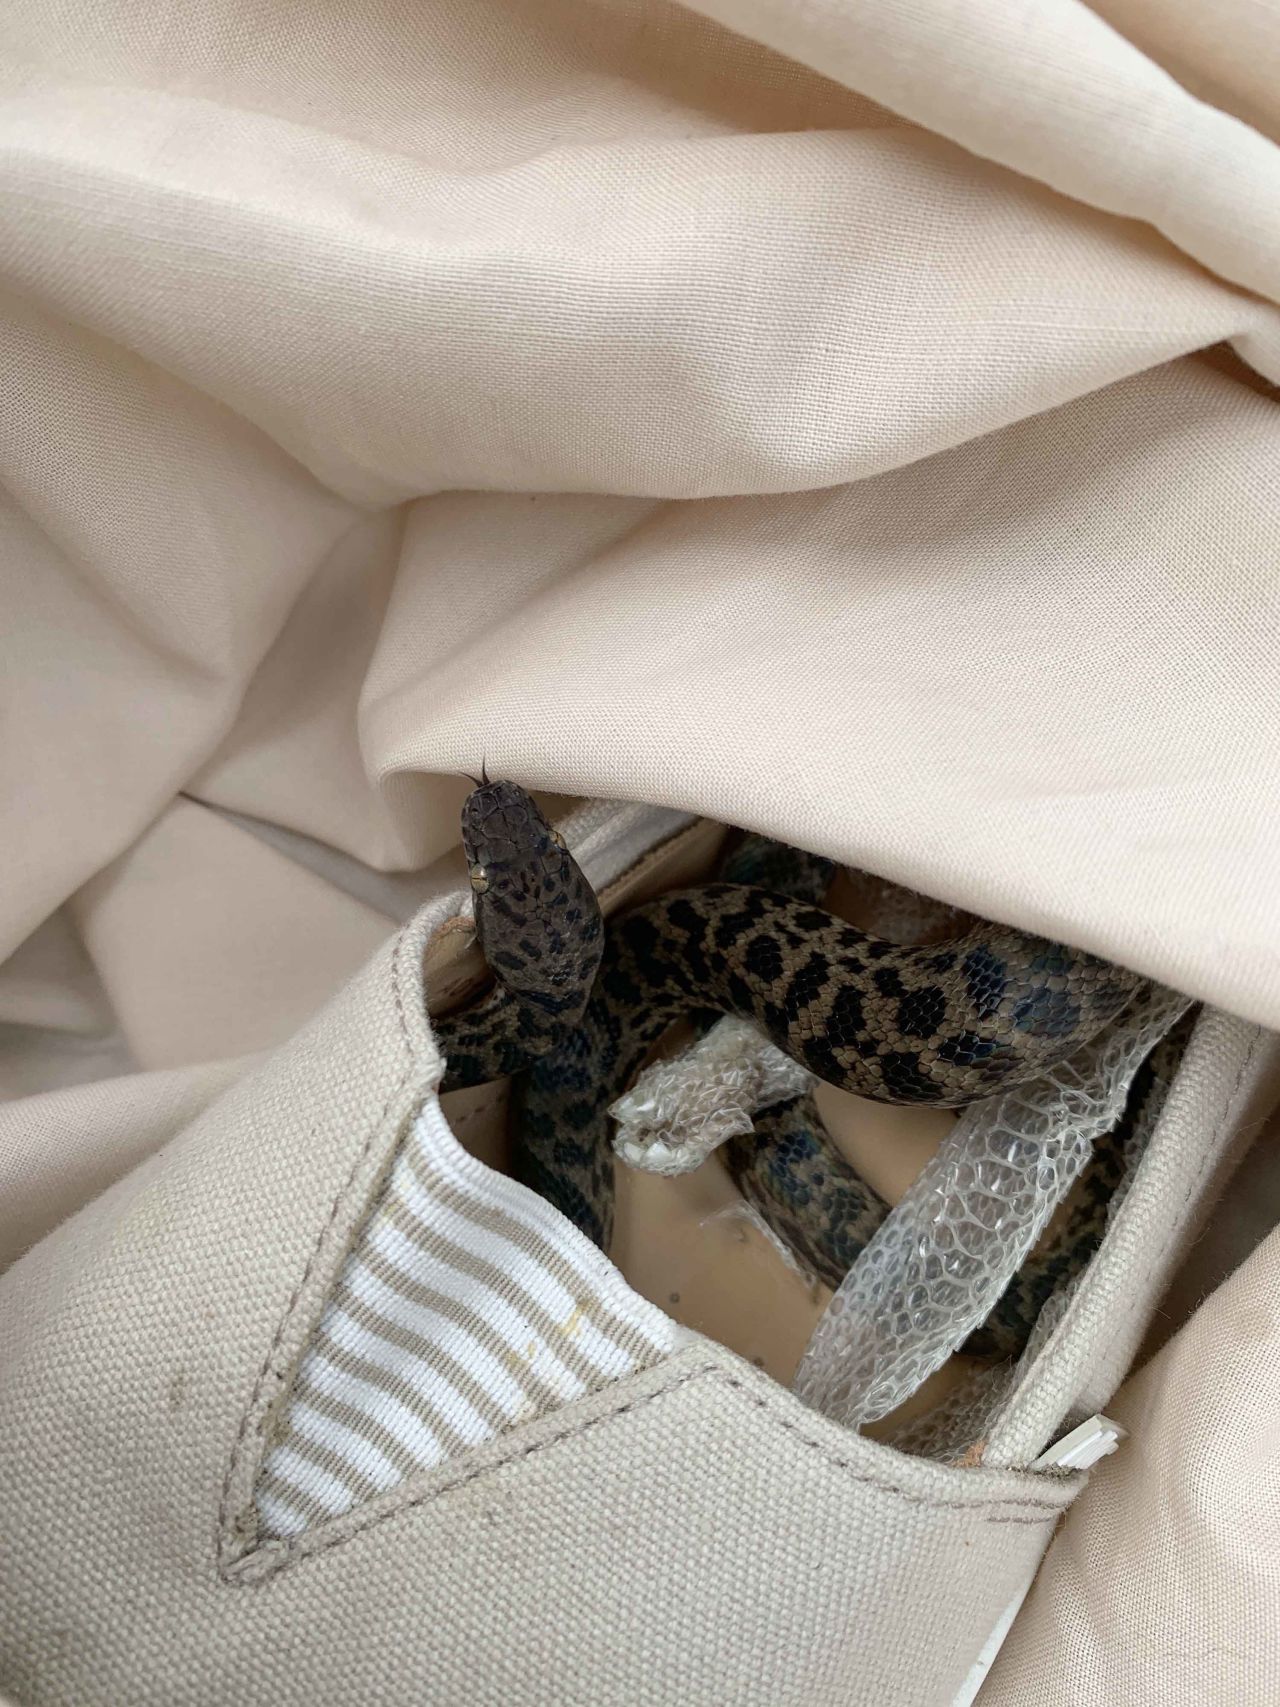 The snake was in a shoe in Moira Boxall's suitcase.